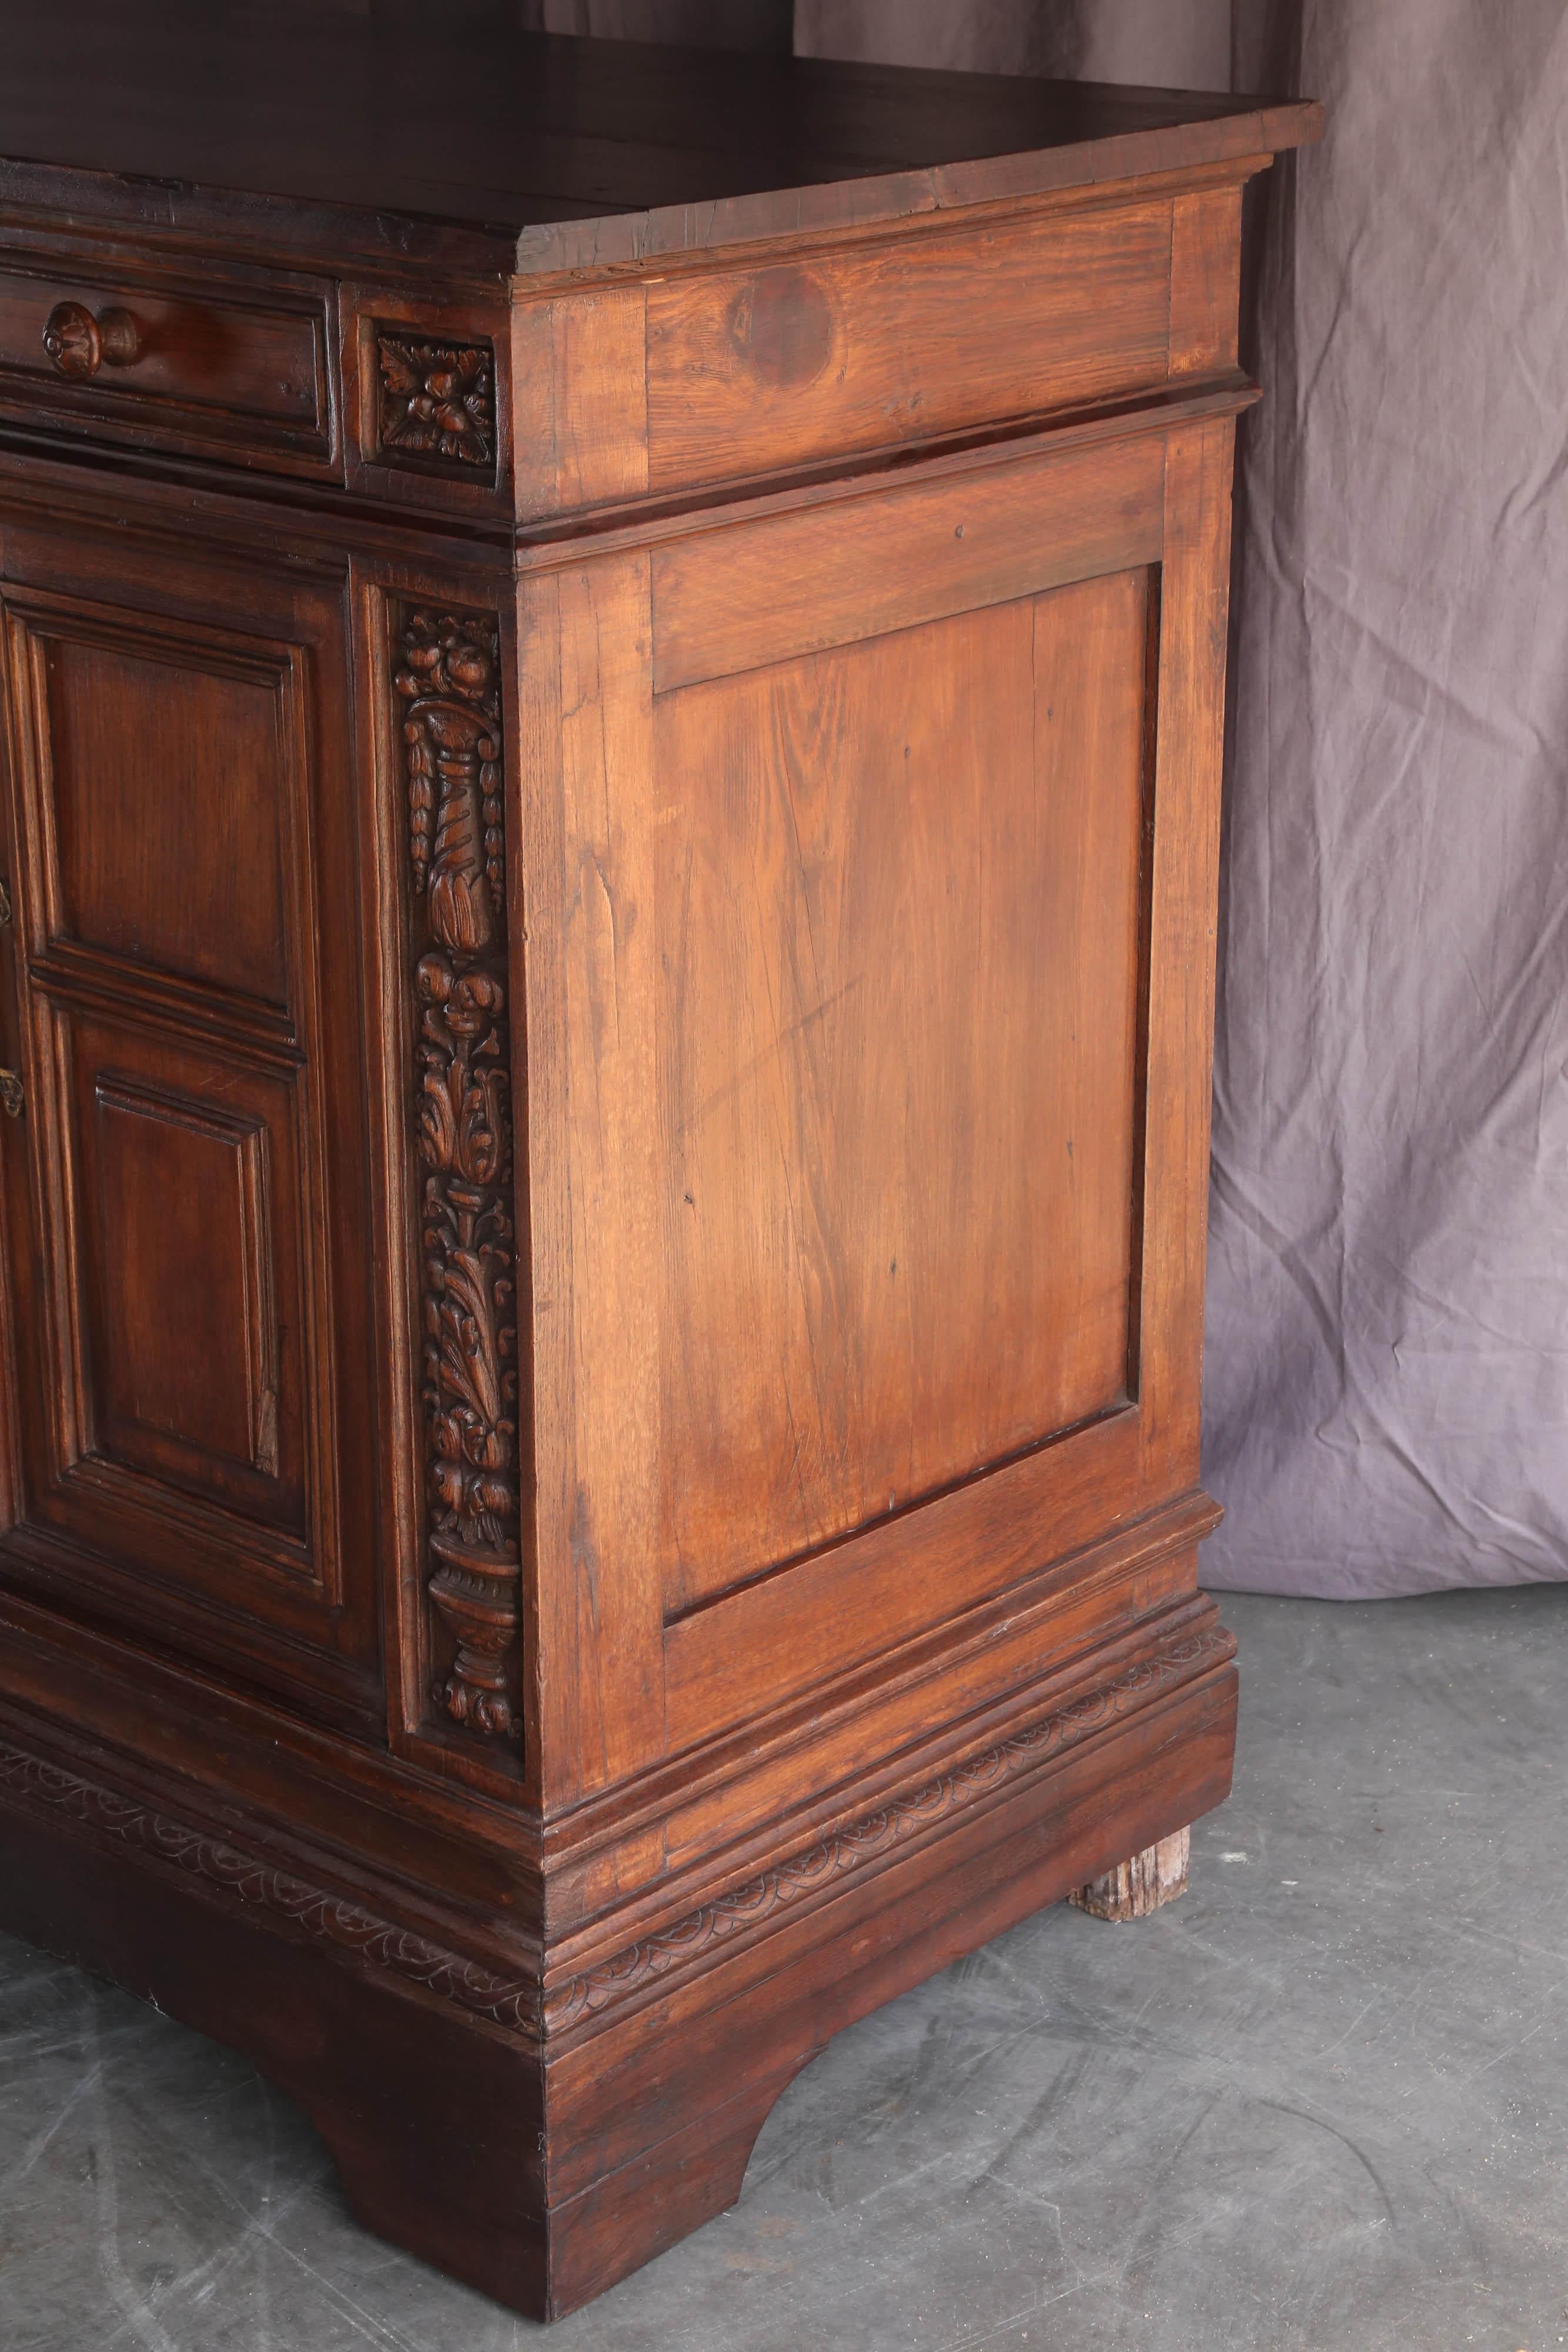 Late 19th Century Solid Teak Wood Superbly Handcrafted French Colonial Buffet In Excellent Condition For Sale In Houston, TX